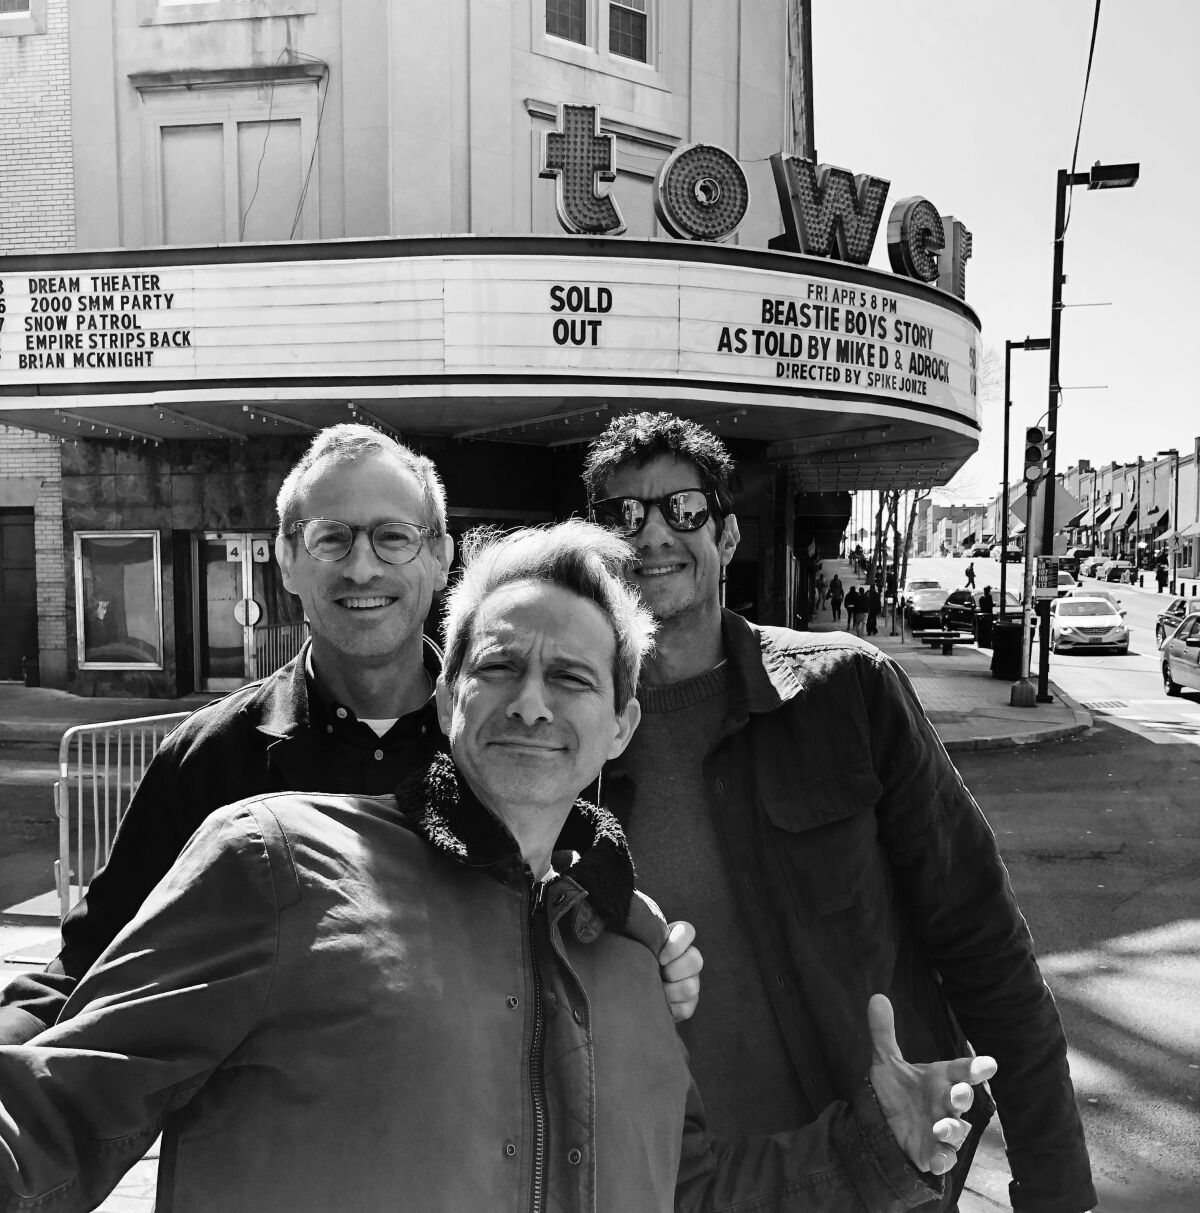 Spike Jonze, left, Adam Horovitz and Mike Diamond outside the live show rehearsals for the “Beastie Boys Story.”